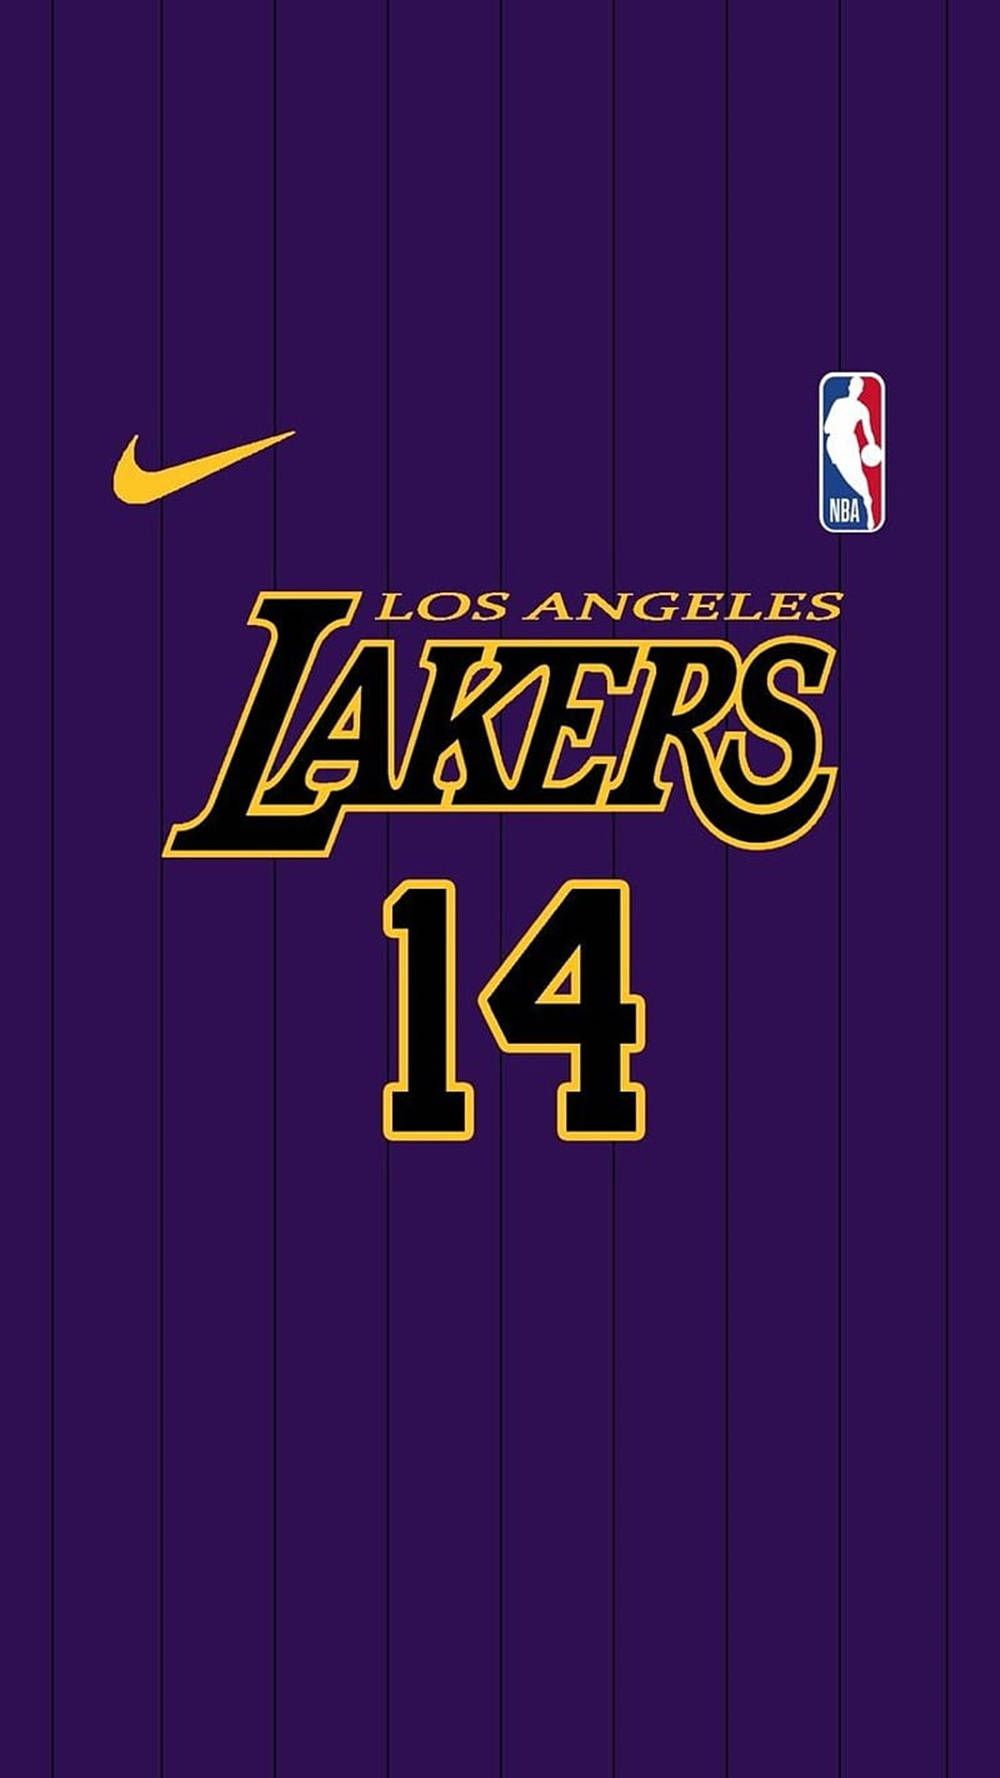 Lakers iPhone Wallpaper with high-resolution 1080x1920 pixel. You can use this wallpaper for your iPhone 5, 6, 7, 8, X, XS, XR backgrounds, Mobile Screensaver, or iPad Lock Screen - Los Angeles Lakers